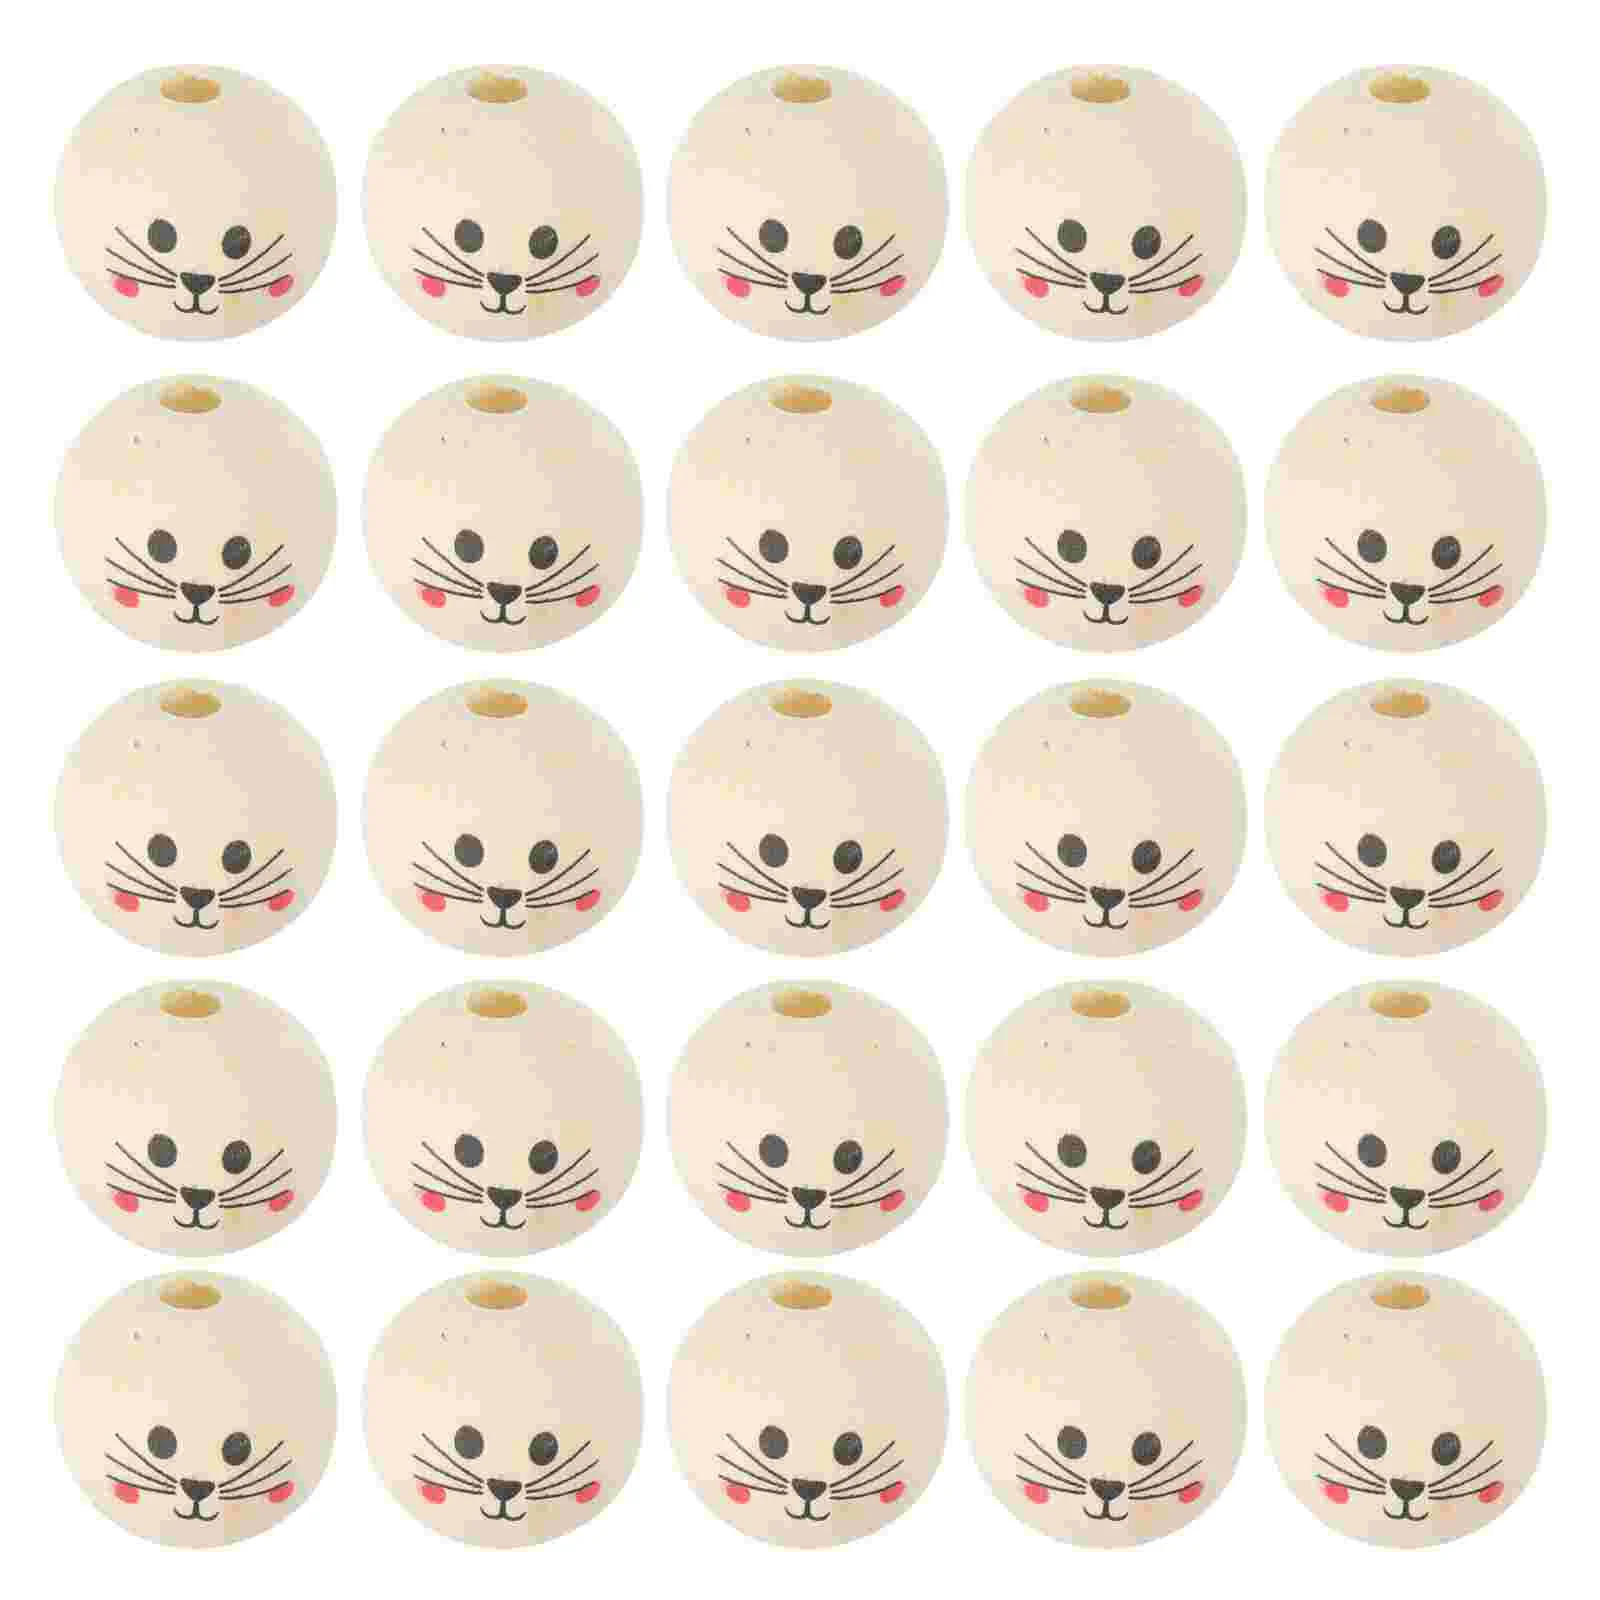 

50 Pcs Round Beads Wooden Crafts Holes An Fittings Jewelry Making Color Bulk DIY